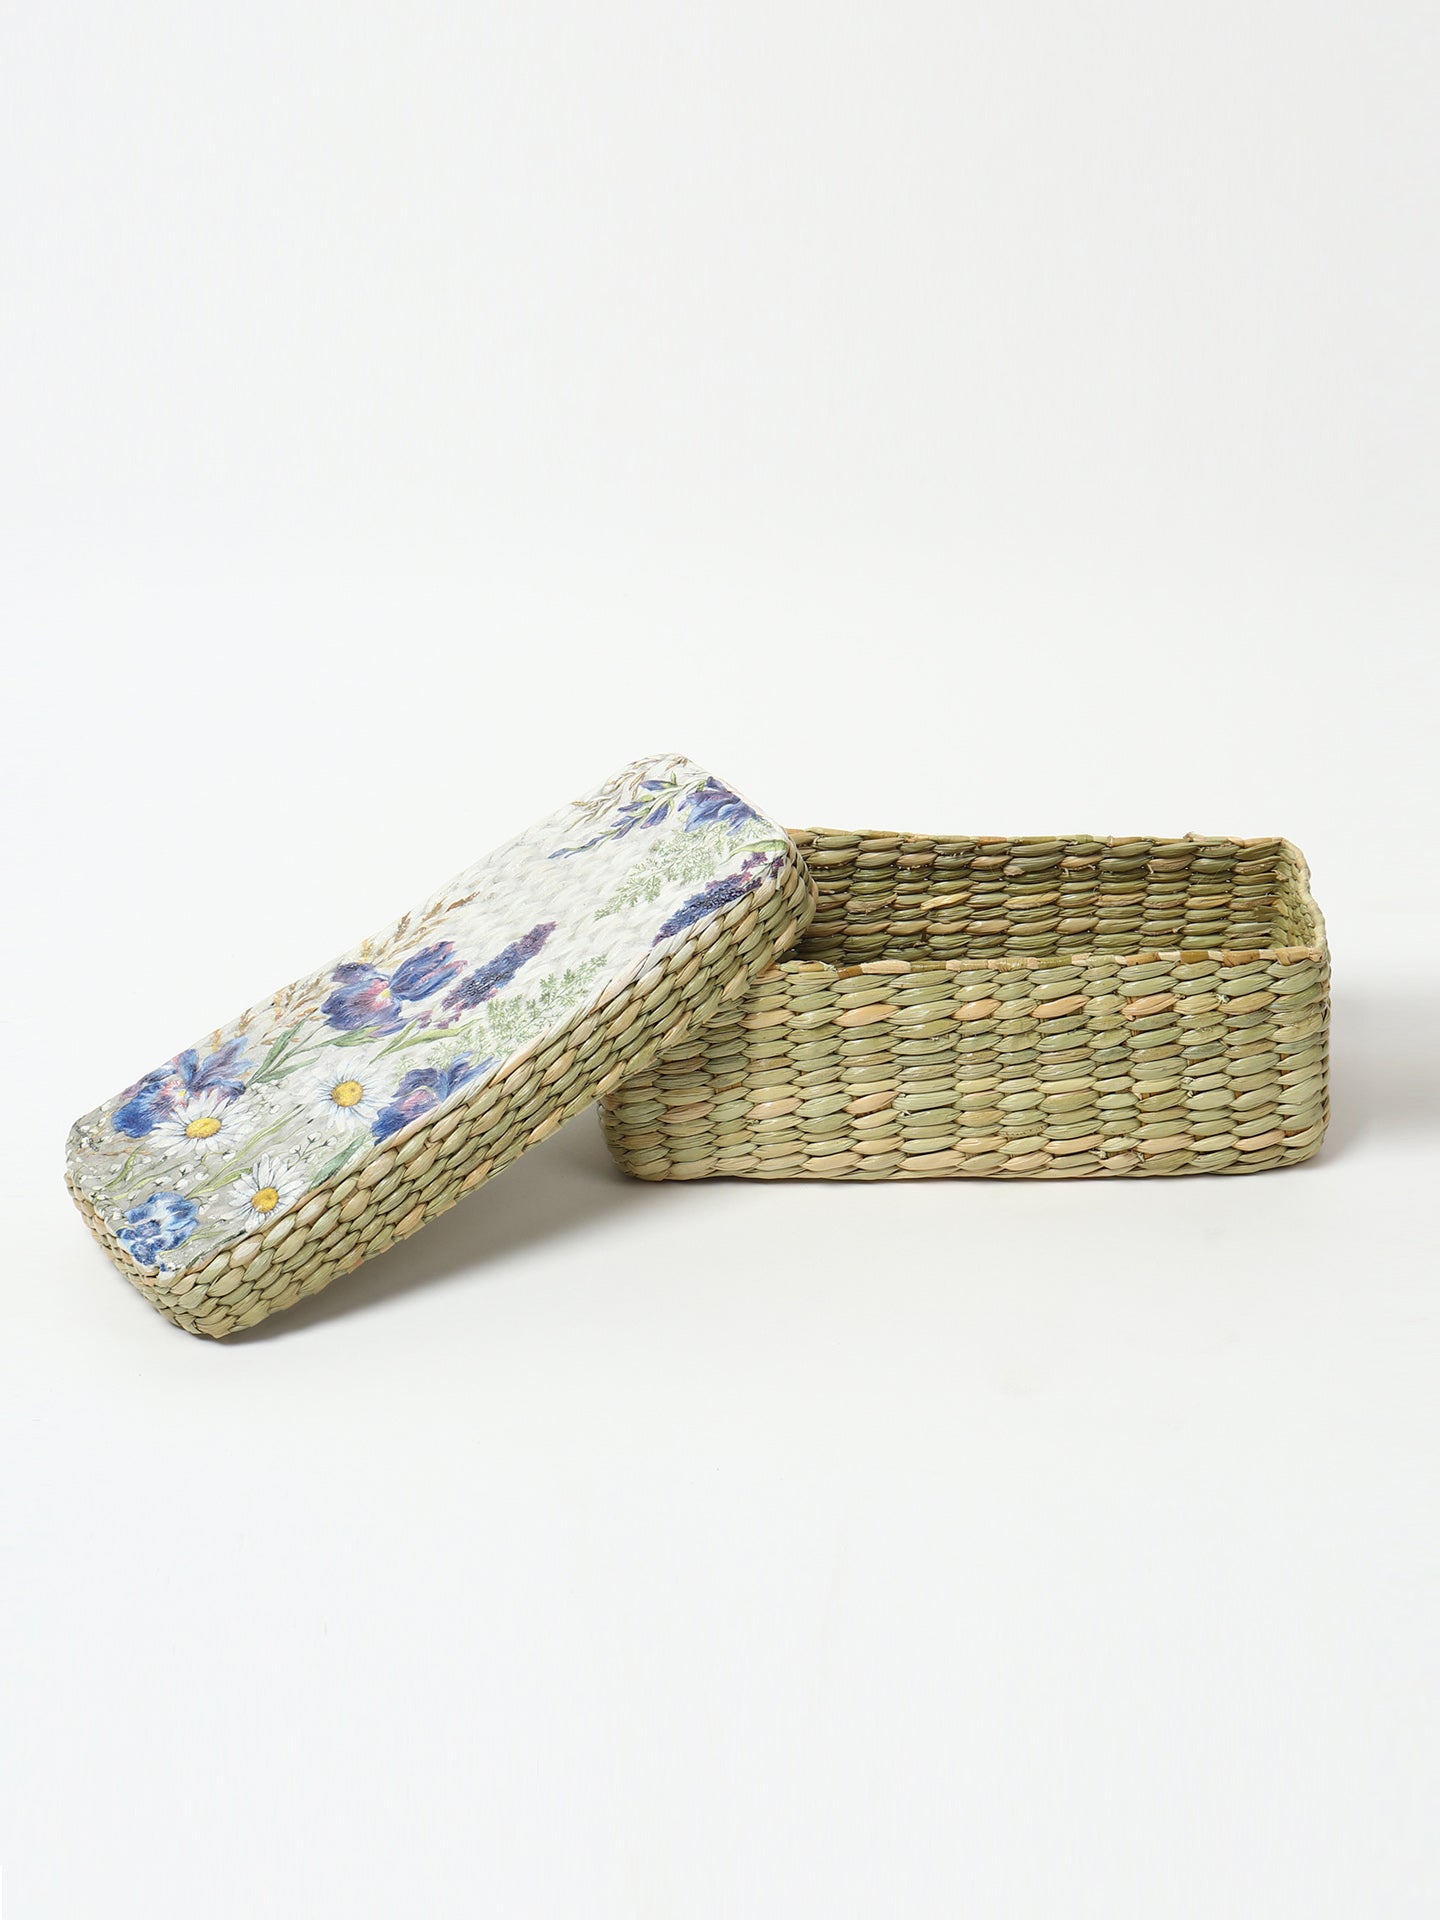 Buy Seagrass Lid Box